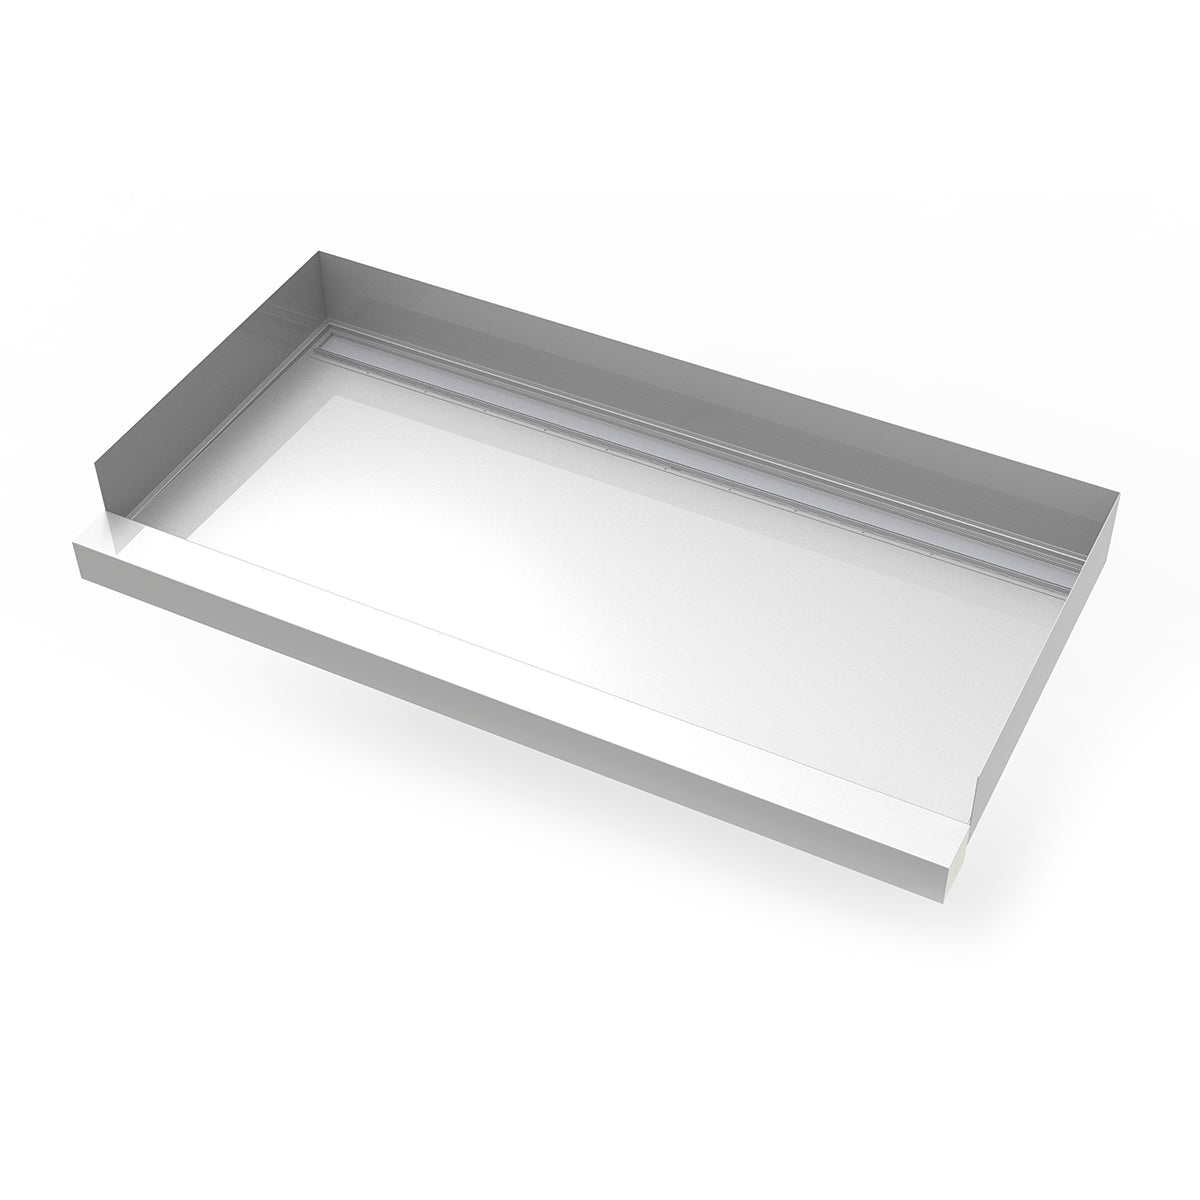 Infinity Drain 30"x 60" Stainless Steel Shower Base with Back Wall Tile Insert Linear Drain location